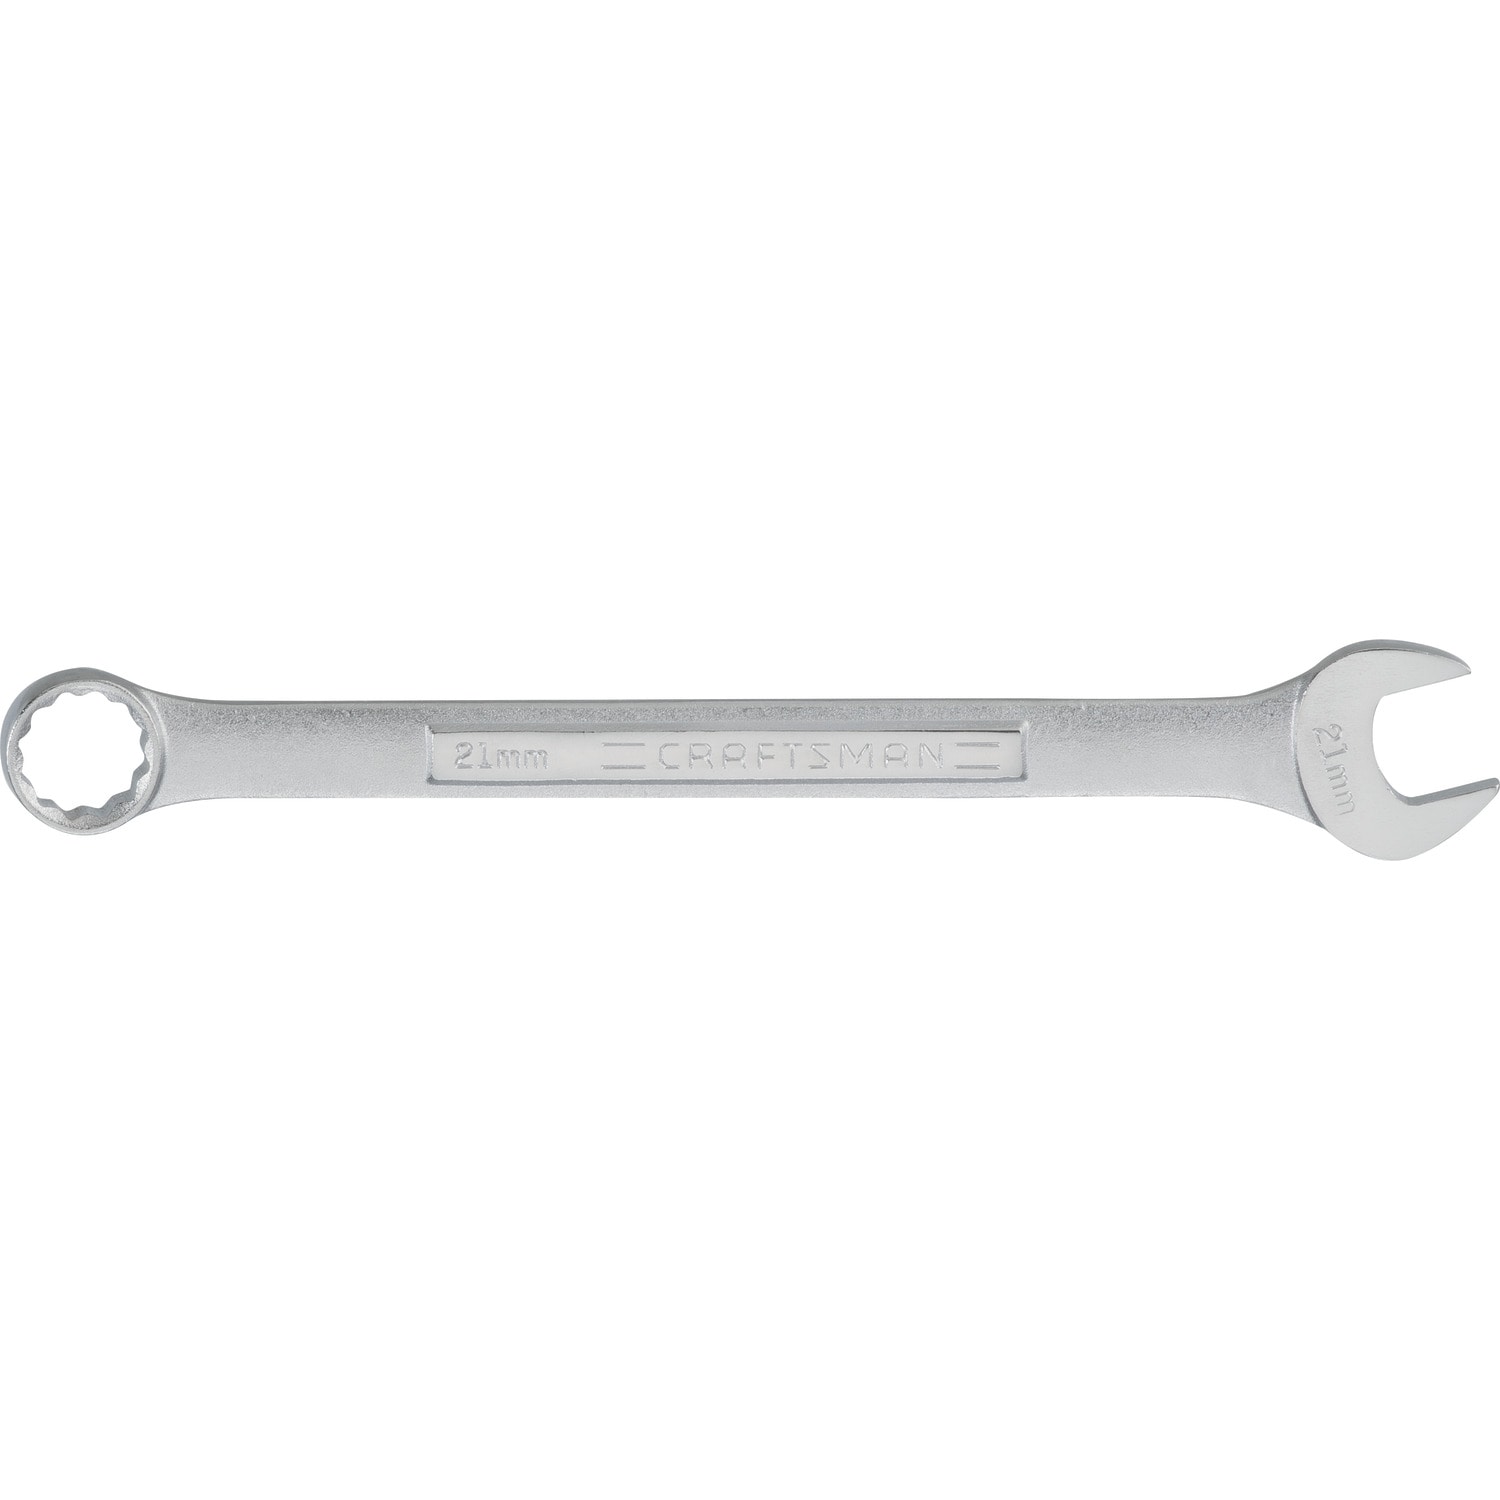 CRAFTSMAN 21mm 12-point Metric Standard Combination Wrench in the Combination  Wrenches  Sets department at